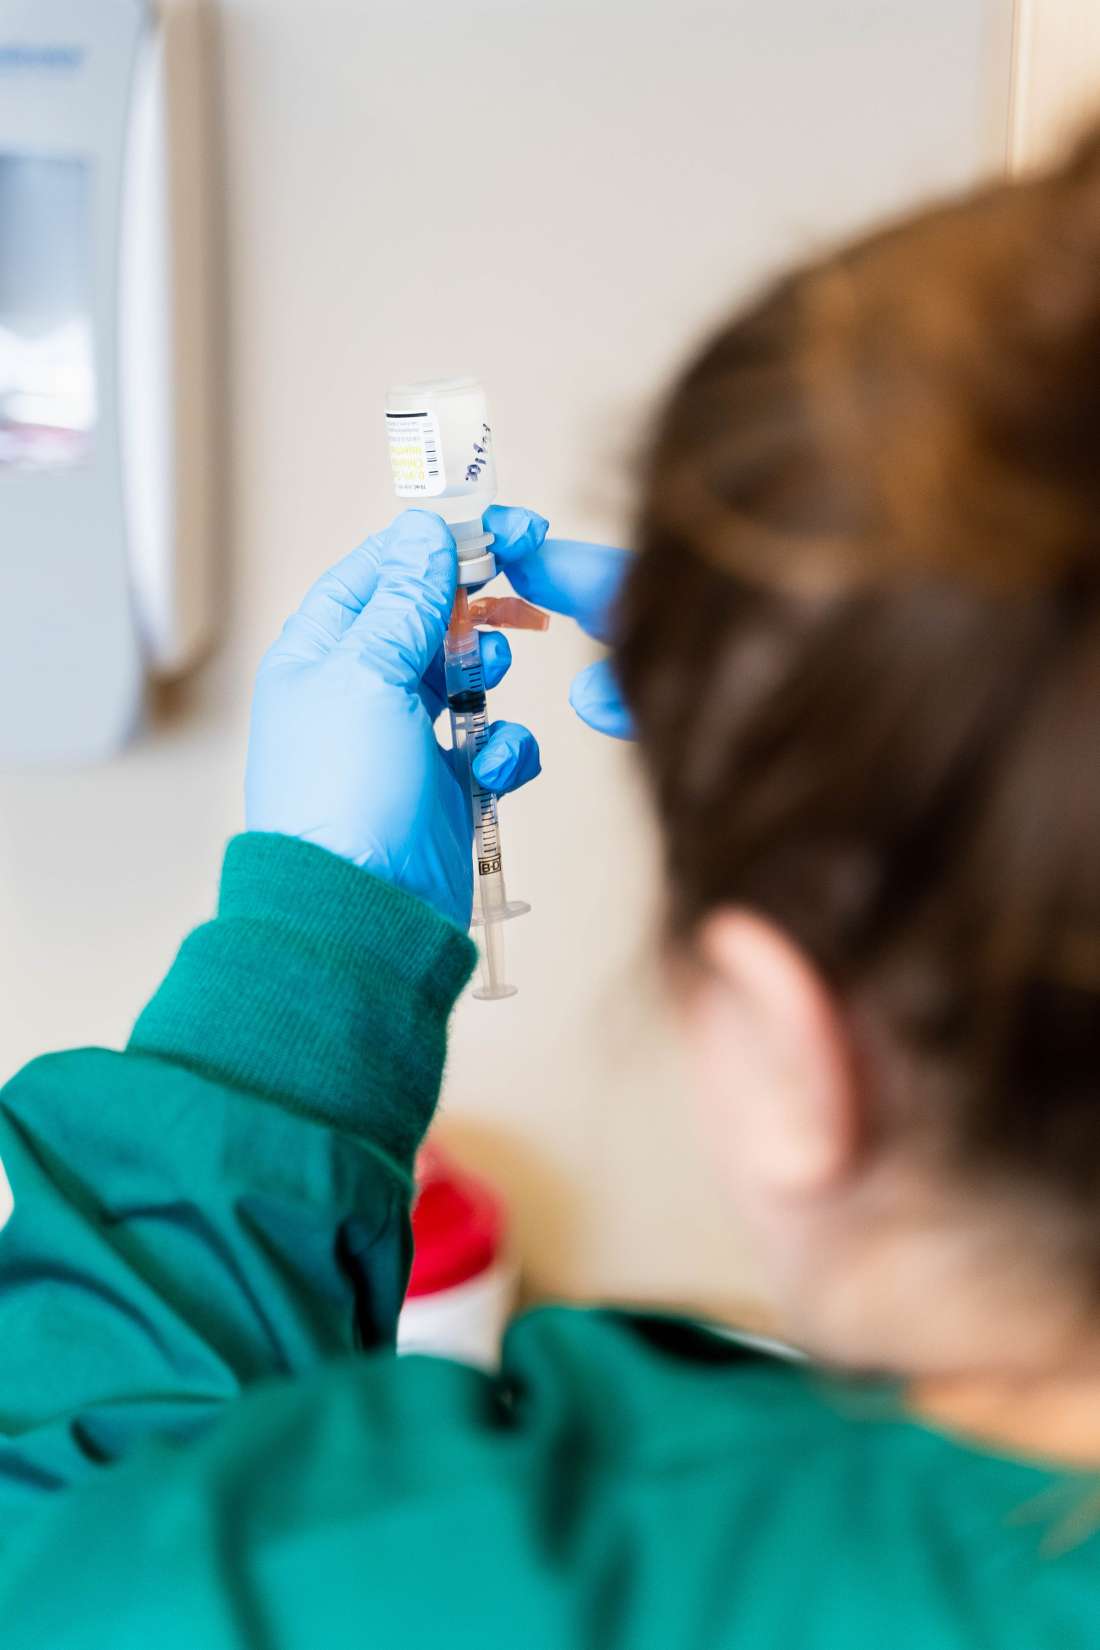 A Medical Assistant uses a syringe to collect medicine from a vial.